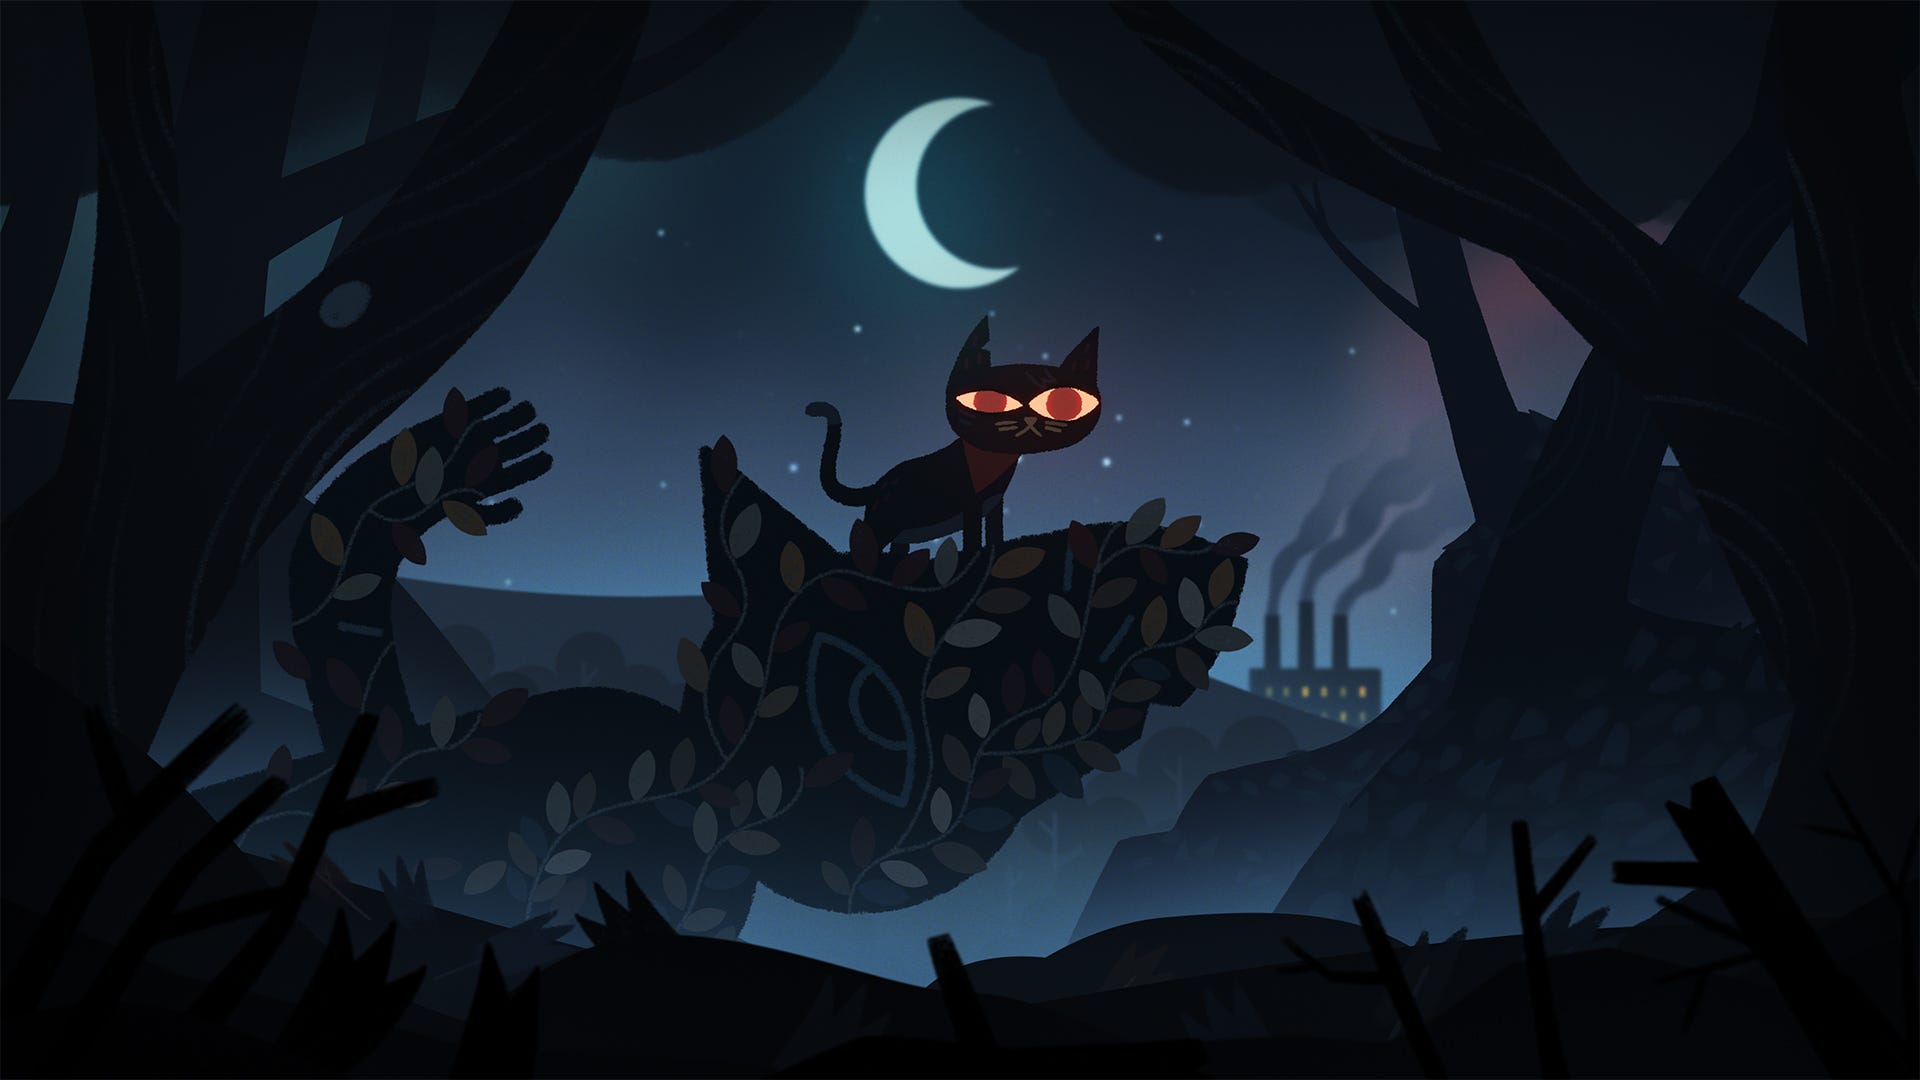 Revenant Hill is the new cat-starring game from the makers of Night In The Woods